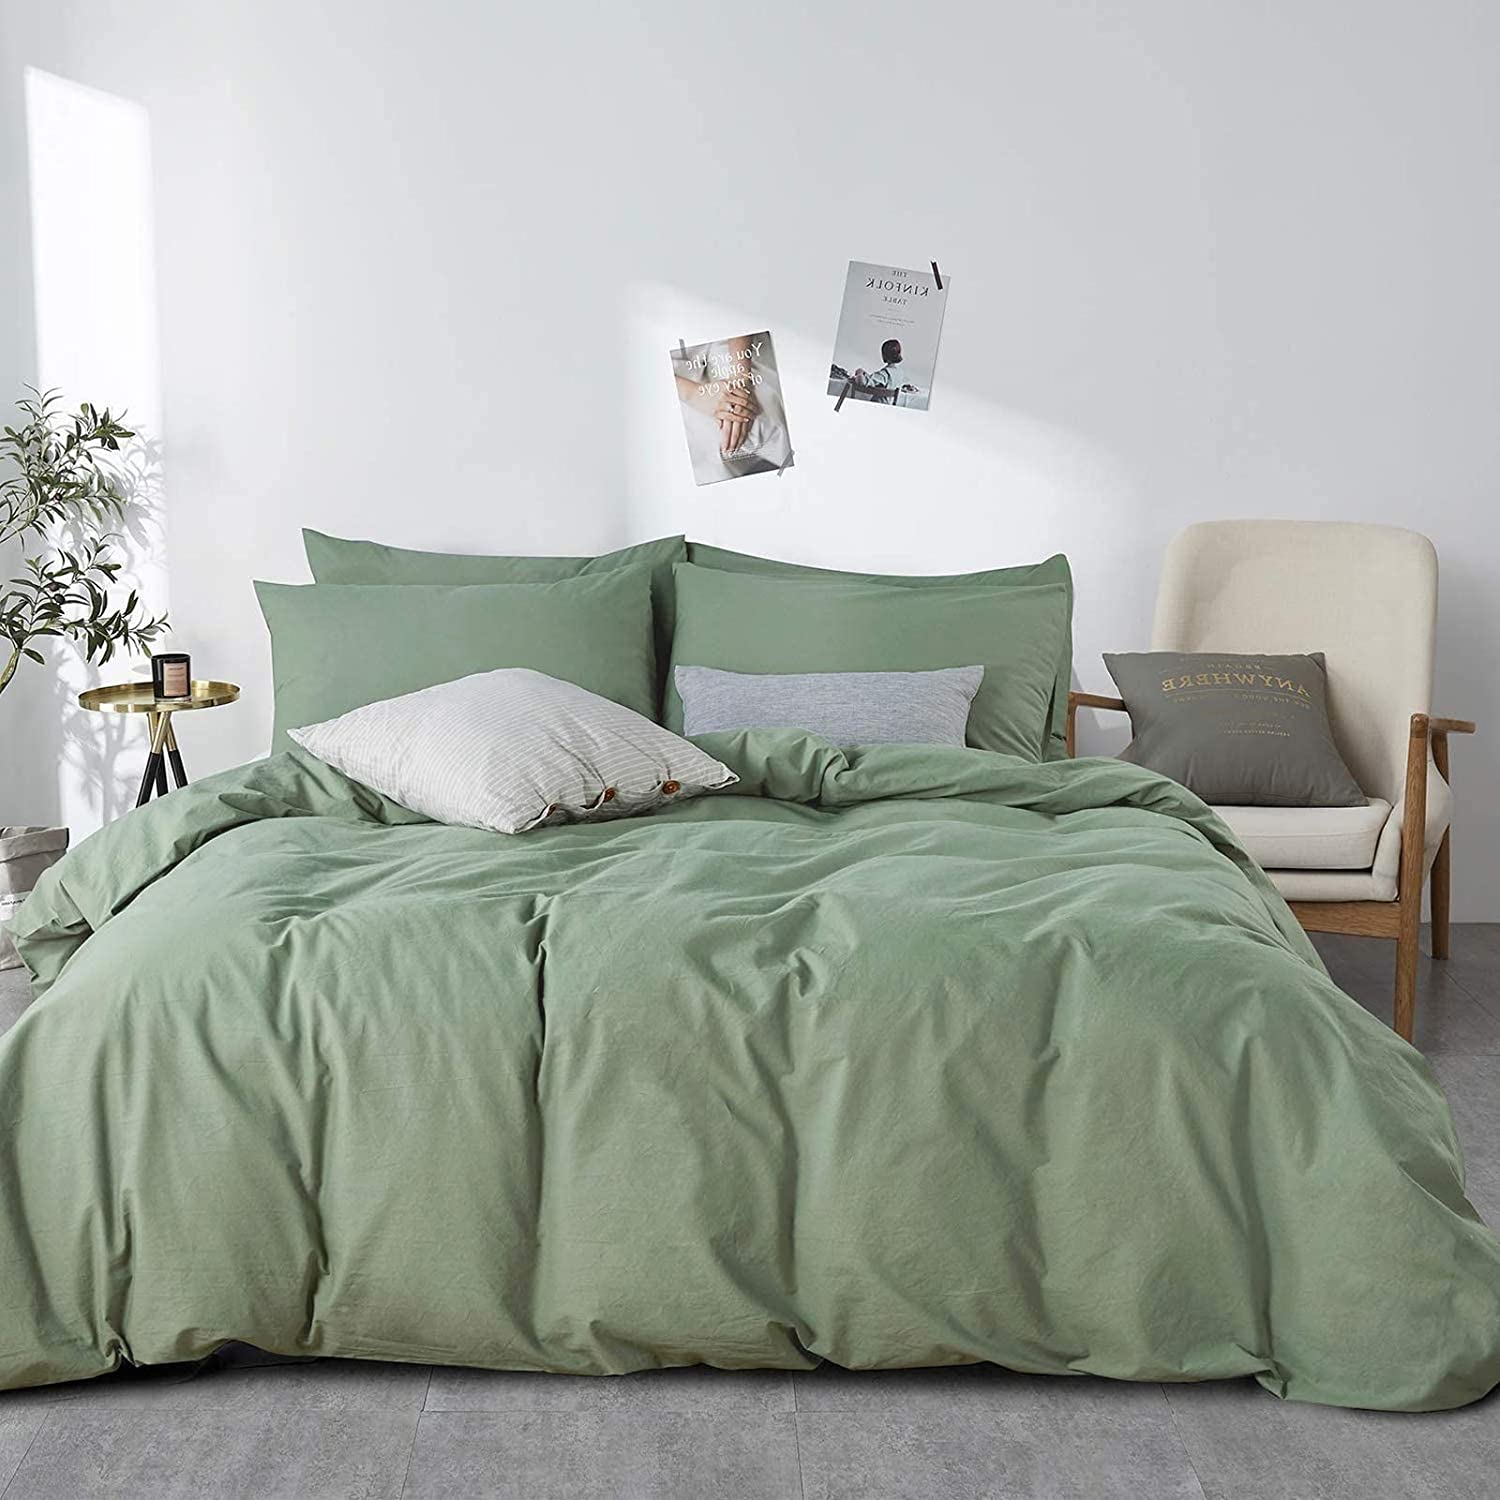 Price:$35.99  Green 100% Washed Cotton Duvet Cover Set, 3 Pieces Luxury Soft Bedding Set with Zipper Closure. Solid Color Pattern Duvet Cover Queen Size(No Comforter) : Home & Kitchen